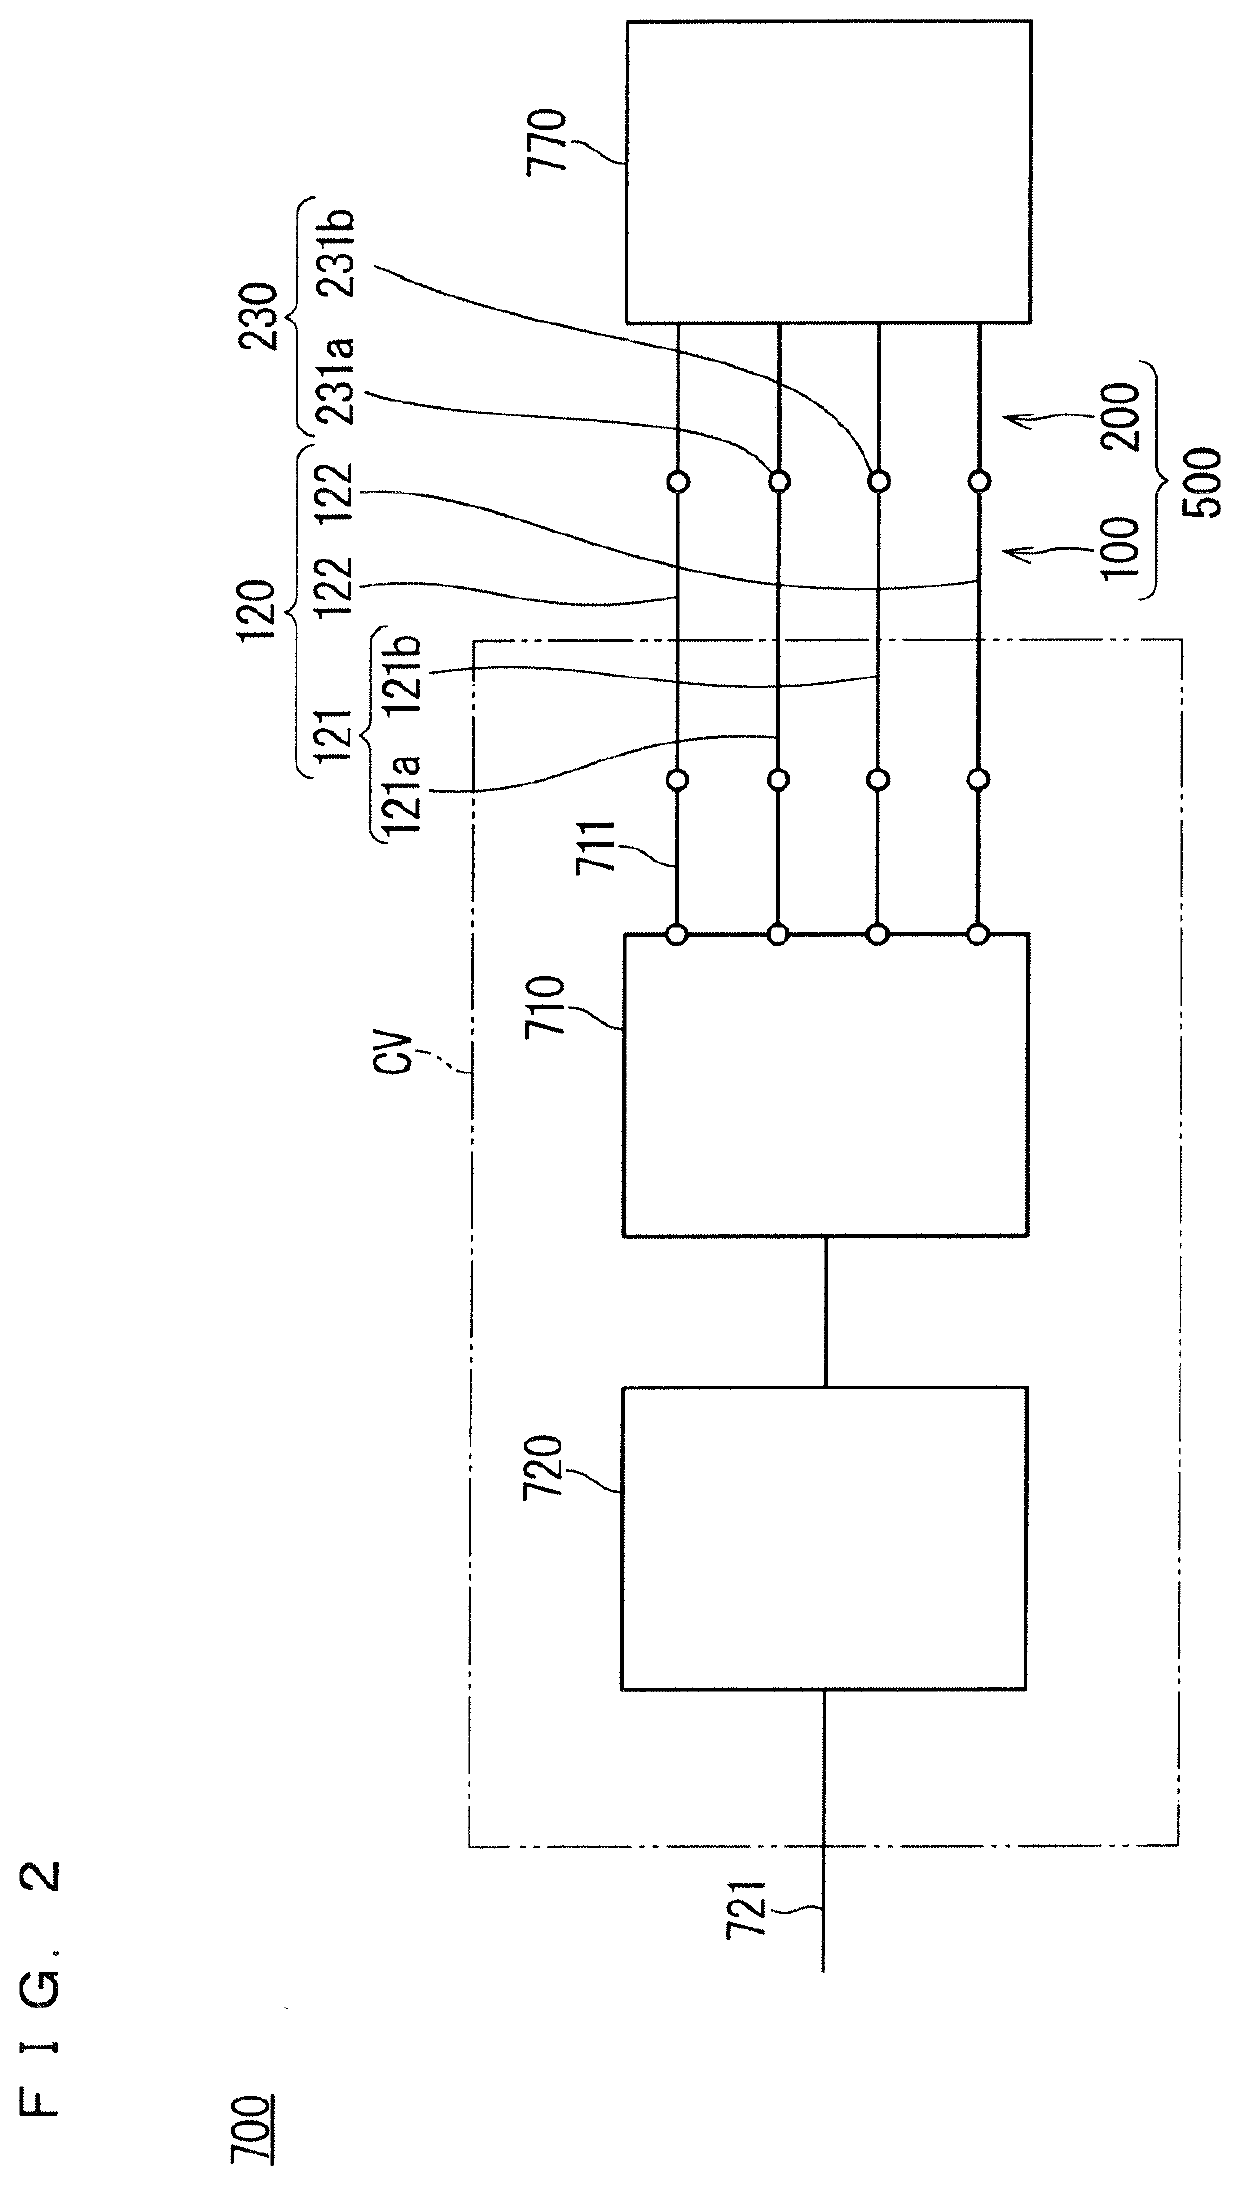 Composite wiring board, package, and electronic device